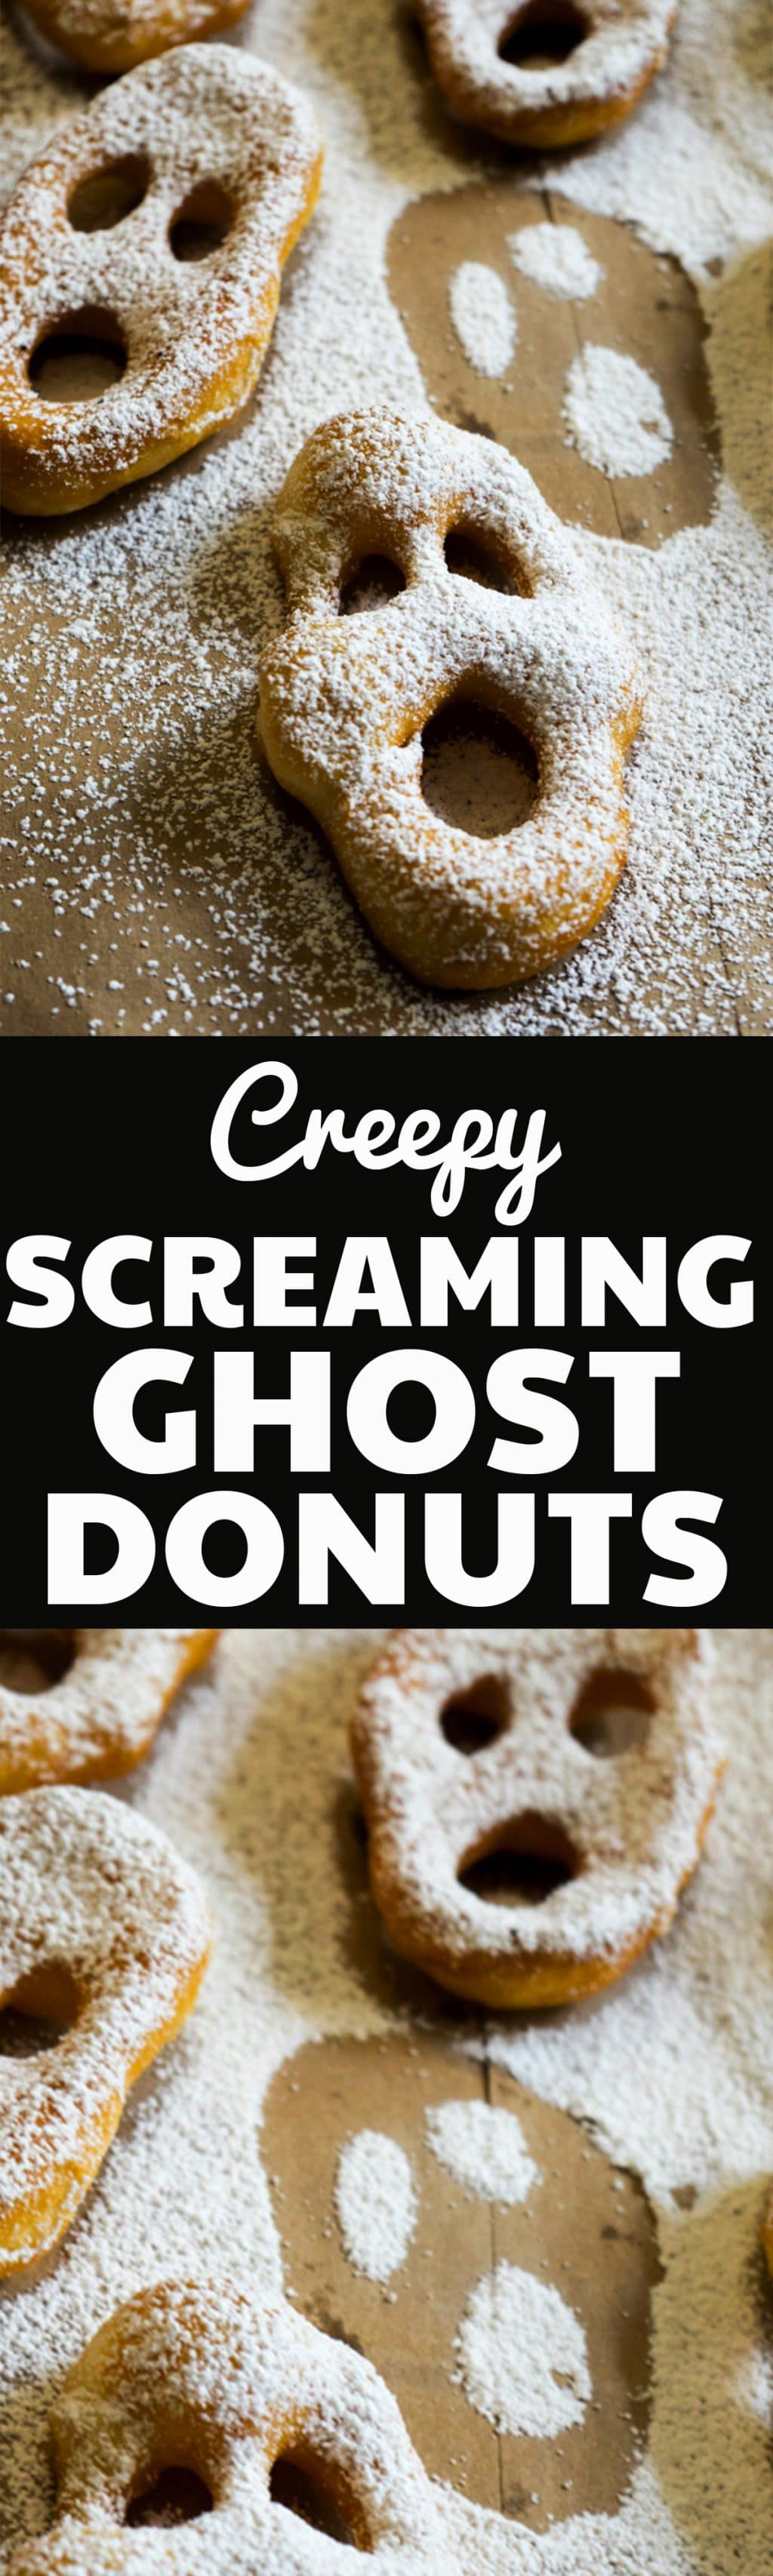 These Screaming Ghost Donuts are the perfect easy dessert for a creepy party this halloween! They are so easy to make using refrigerated biscuit dough and are always a hit!